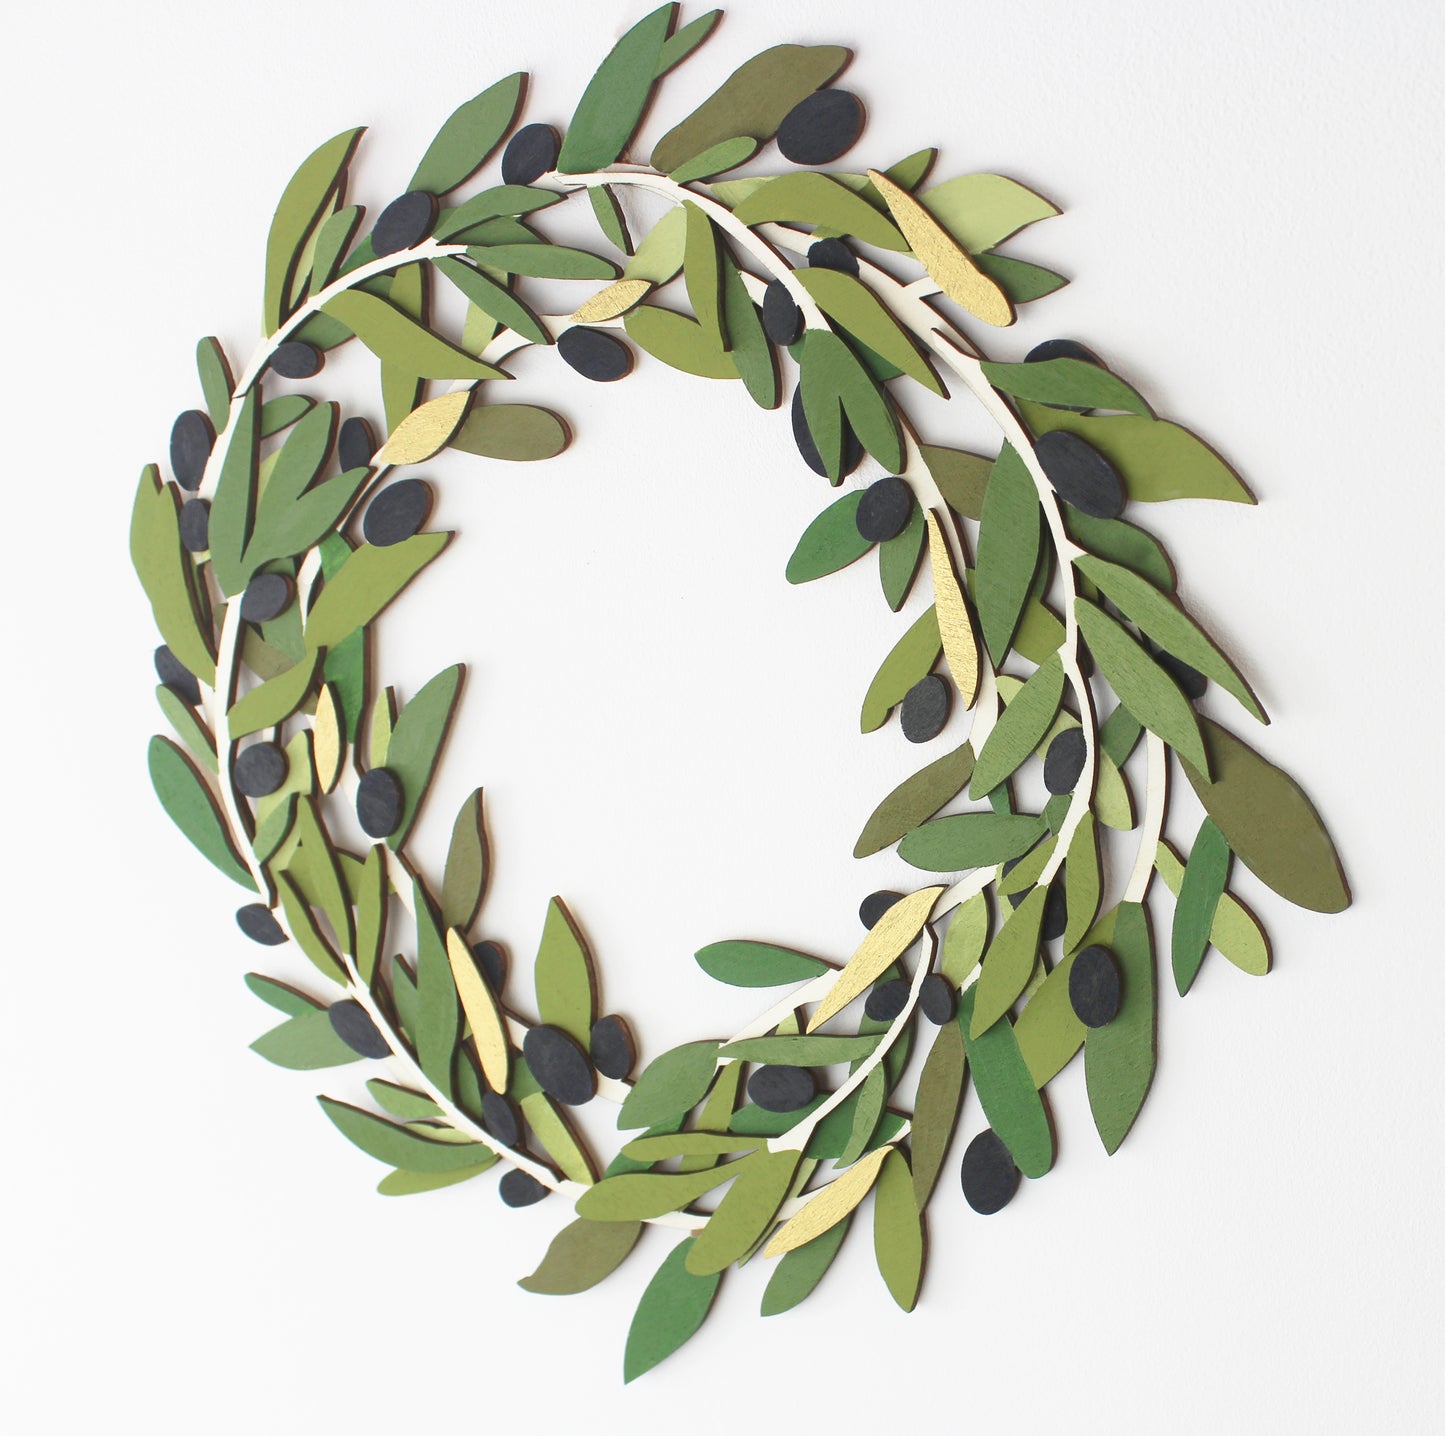 Purity Hand painted Wooden Olive Wreath